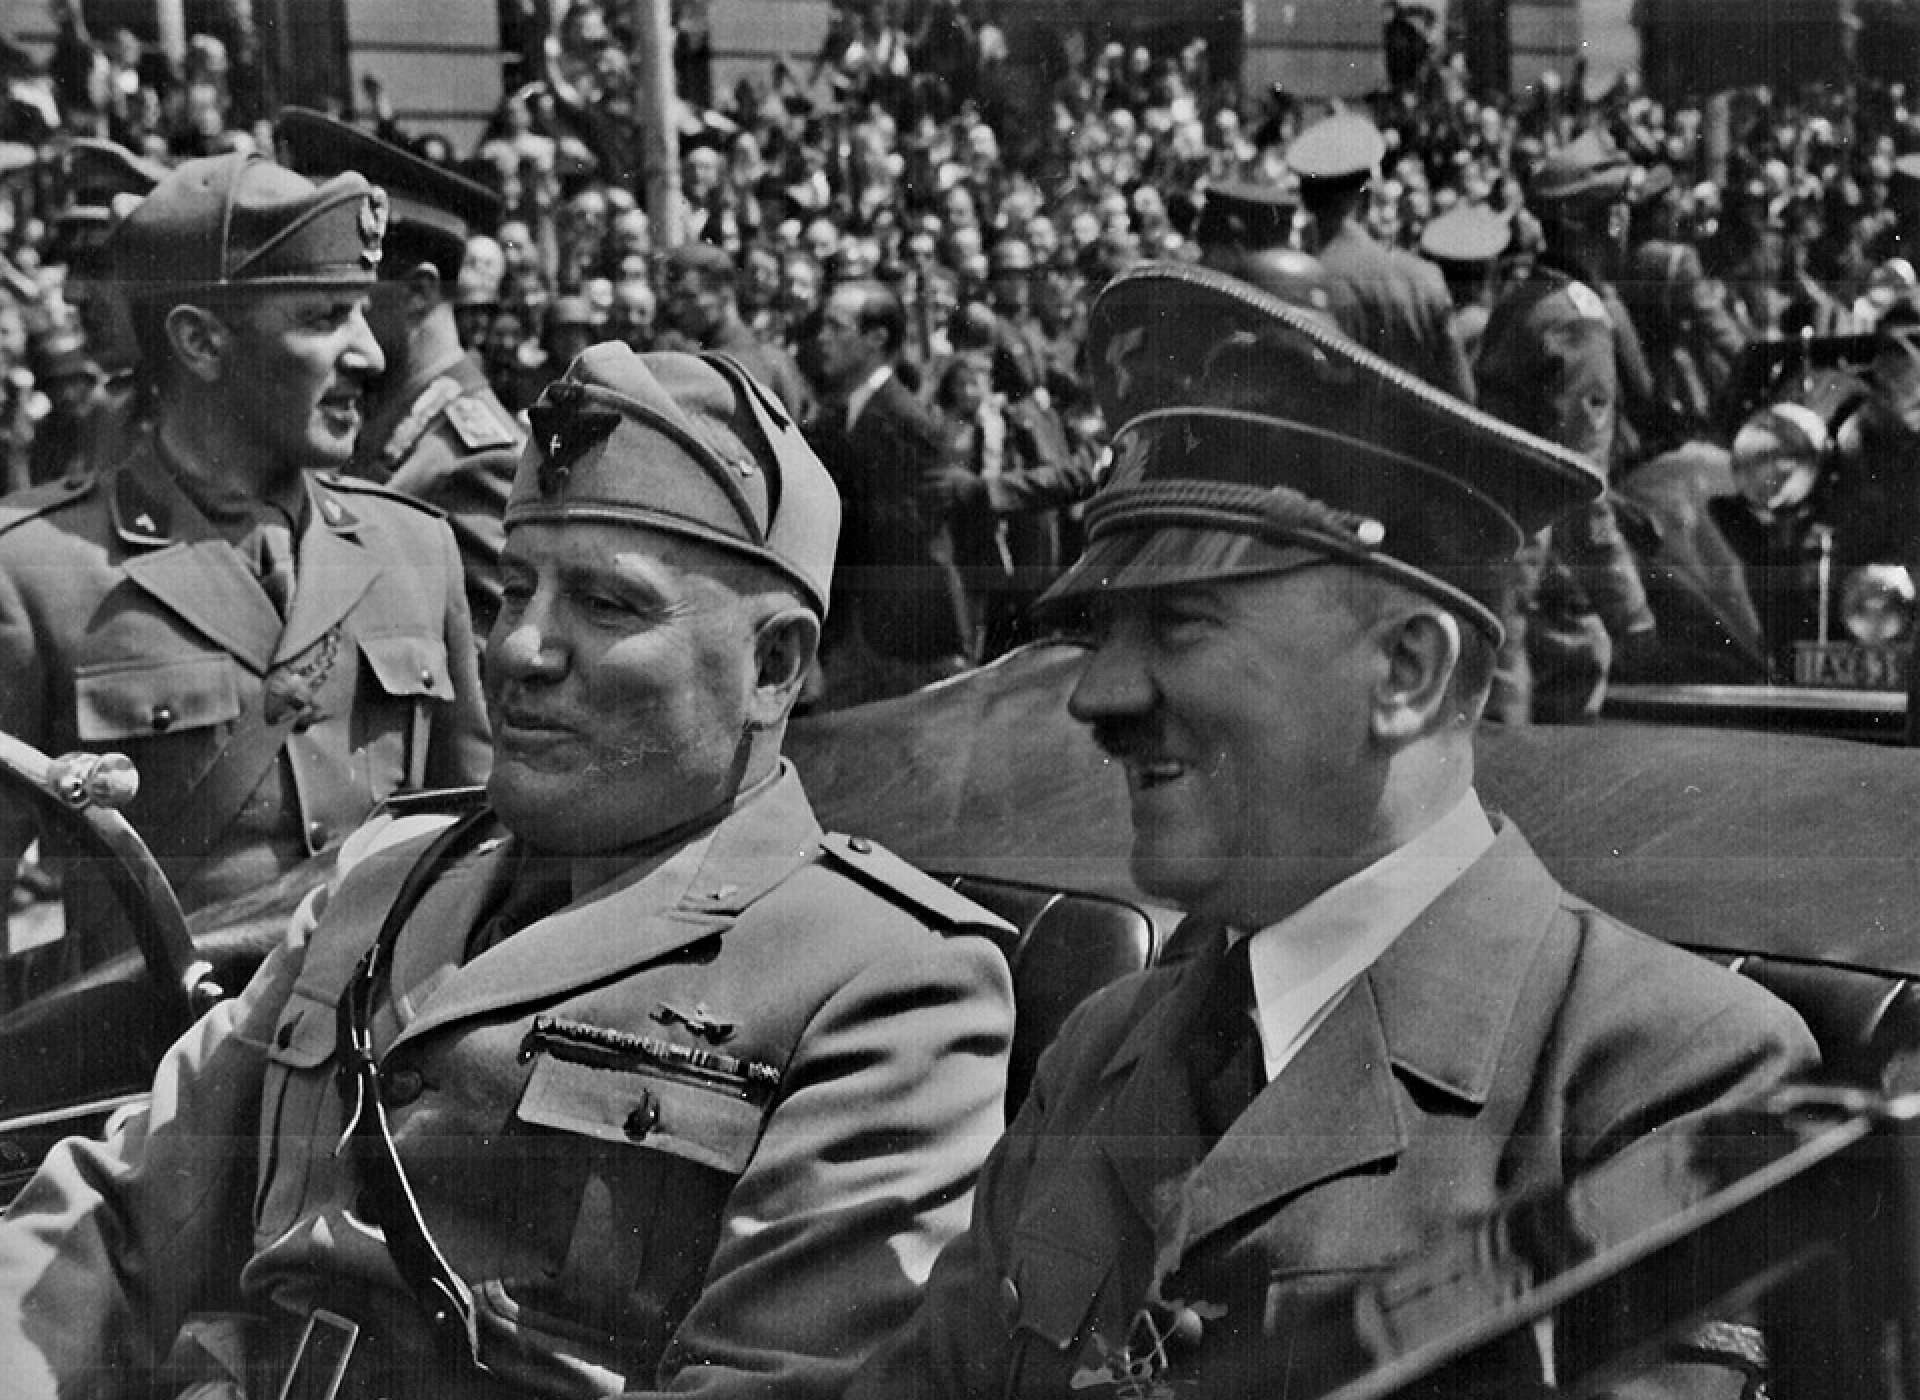 The Duce and the Führer.